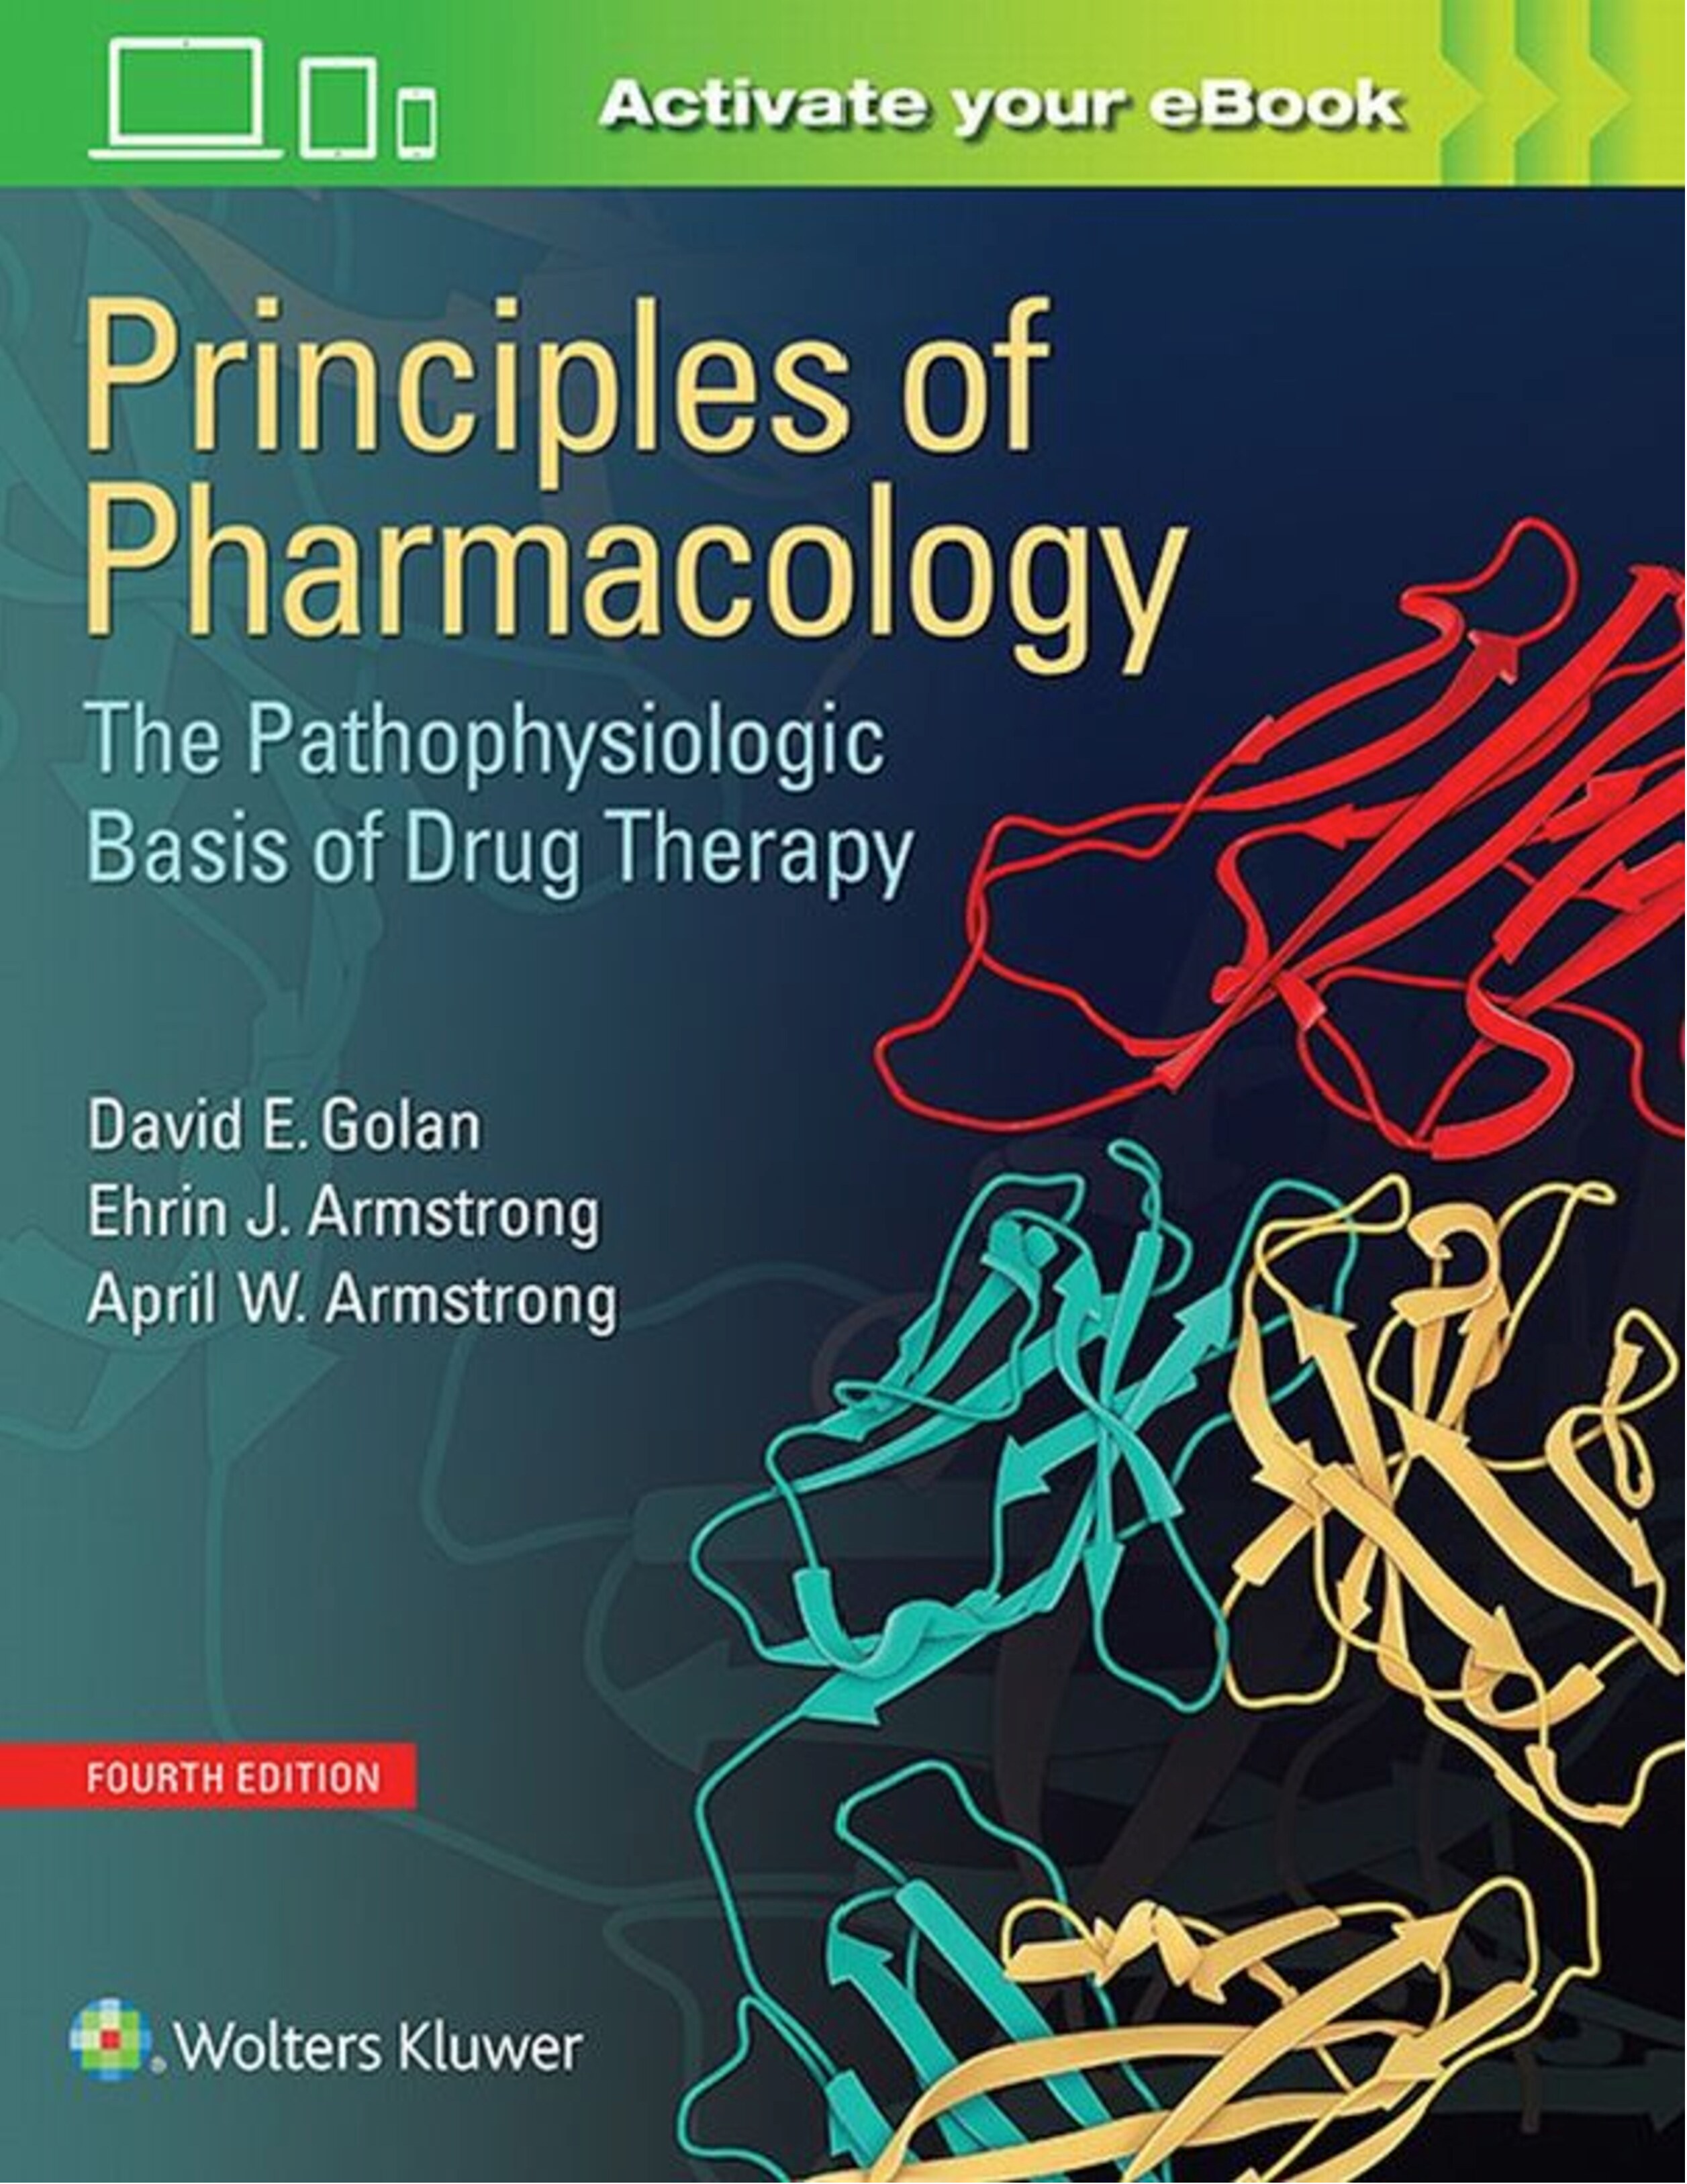 Principles of Pharmacology The Pathophysiologic Basis of Drug Therapy ( PDFDrive )